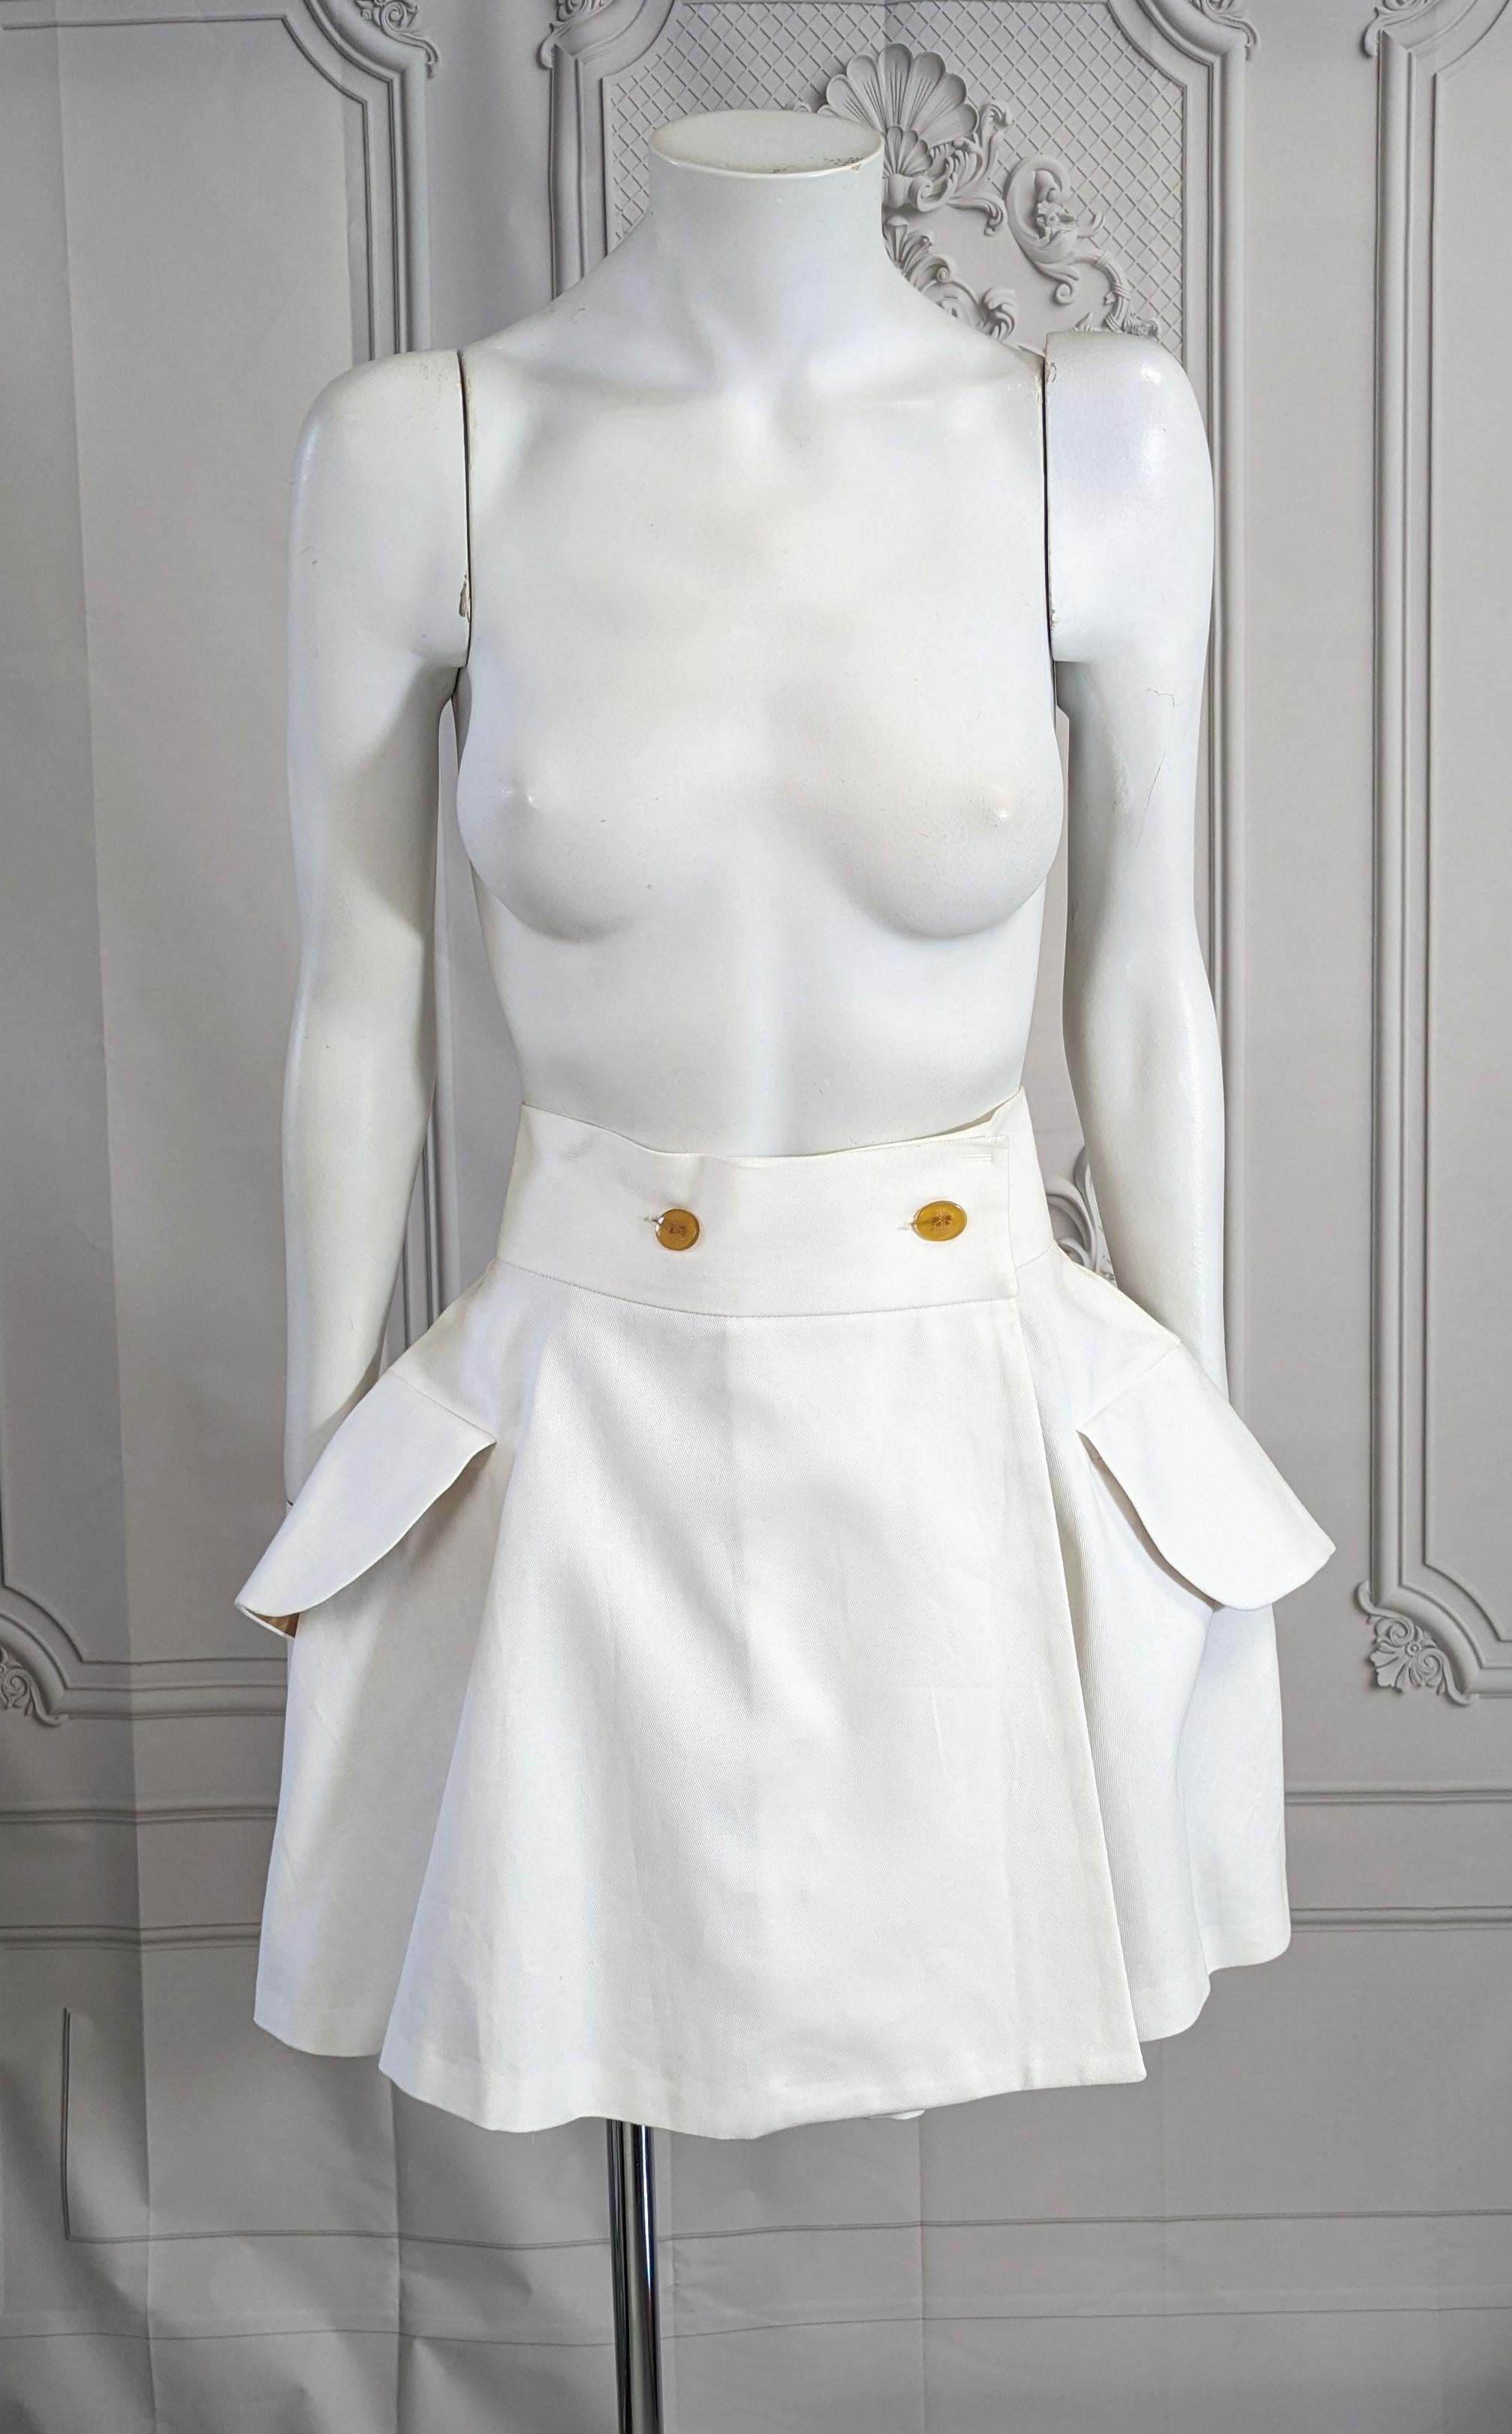 Vivienne Westwood Iconic White Twill Skirt with signature faux horn buttons. Full circle skirt wrapped mini with large faux flap pockets and back vent. Size 42 IT, 6 US, 10 UK Fully lined.
1990's UK. Waist is approx 26-27